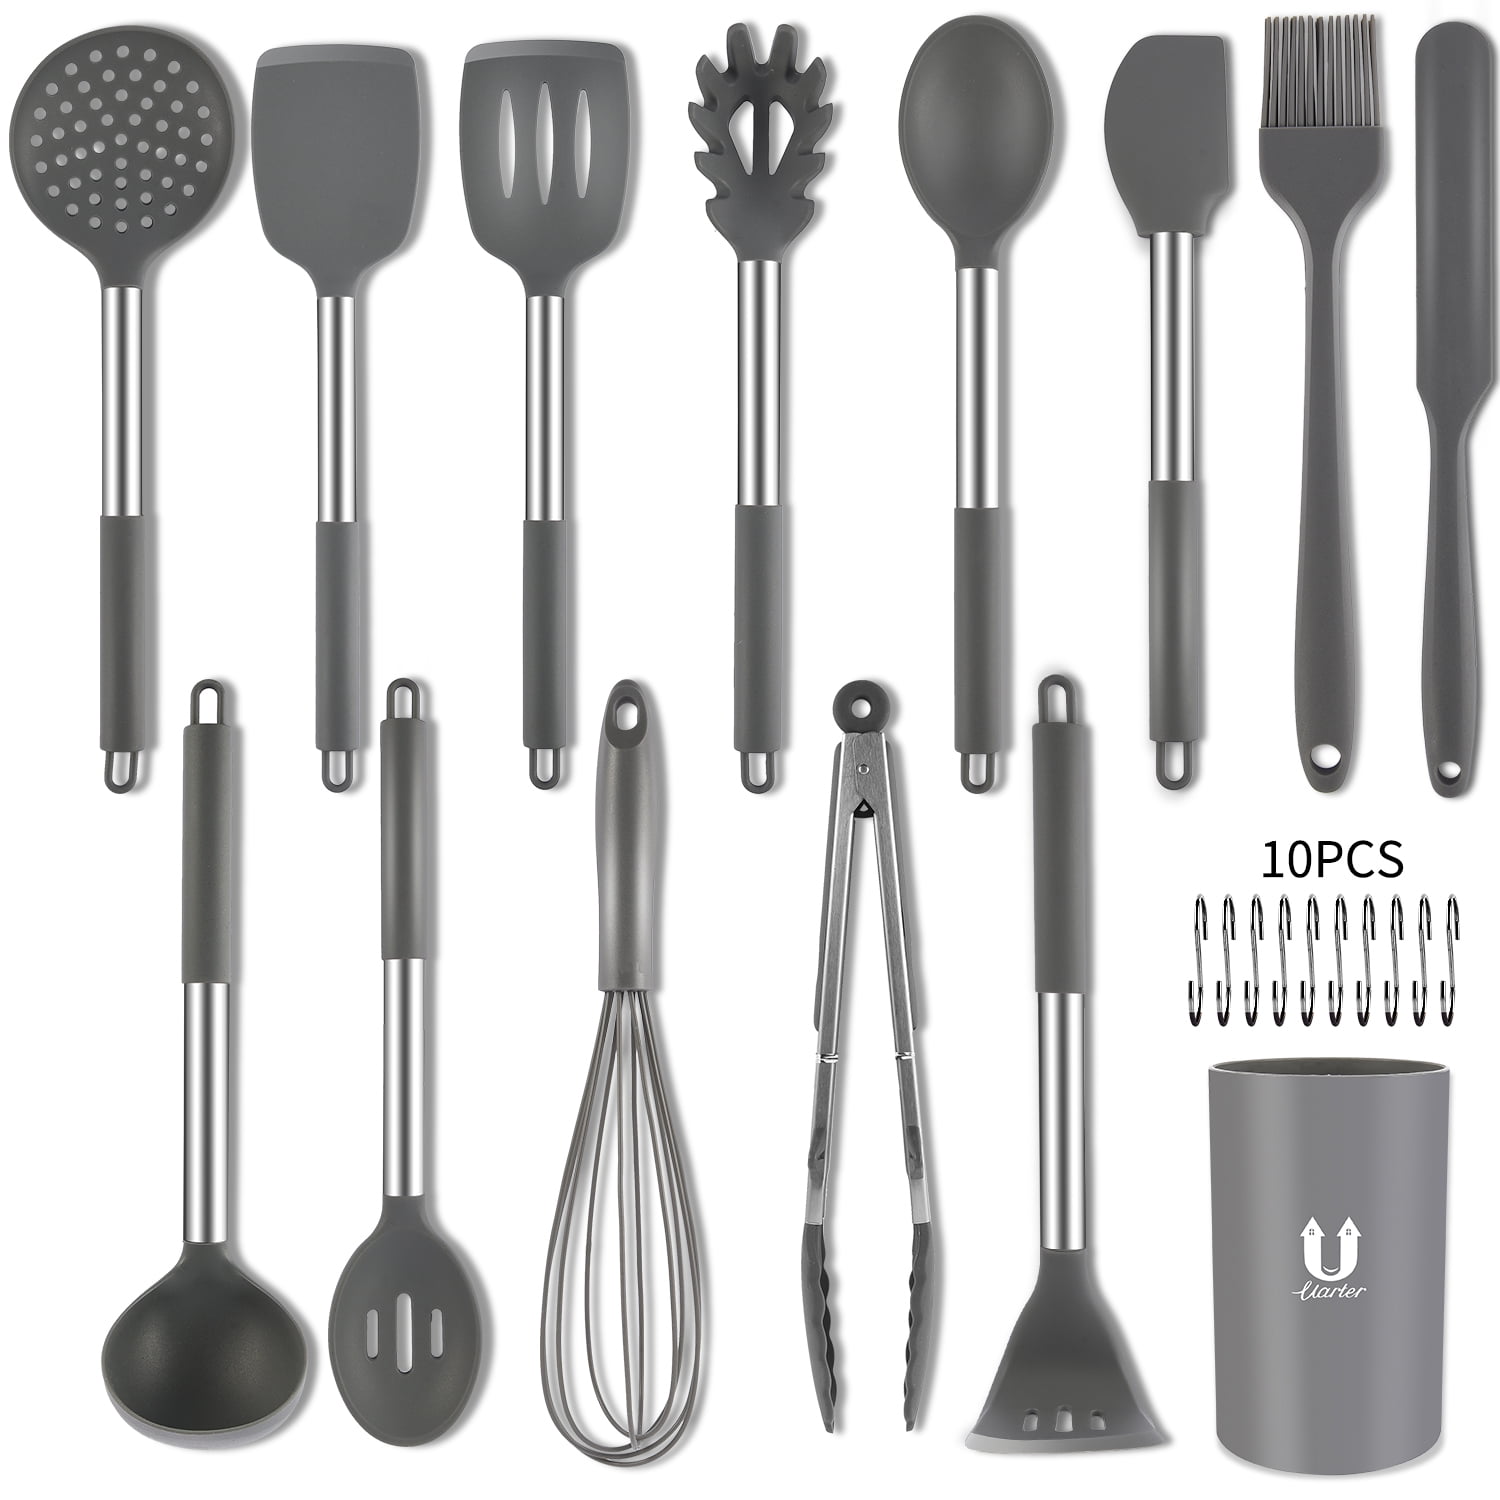 Heat Resistant Kitchen Gadgets Tools Set for Cookware Silicone Cooking Utensil Kitchen Utensil Set Black 24 Pcs Non-stick Cooking Utensils Spatula Set with Holder by AIKKIL 